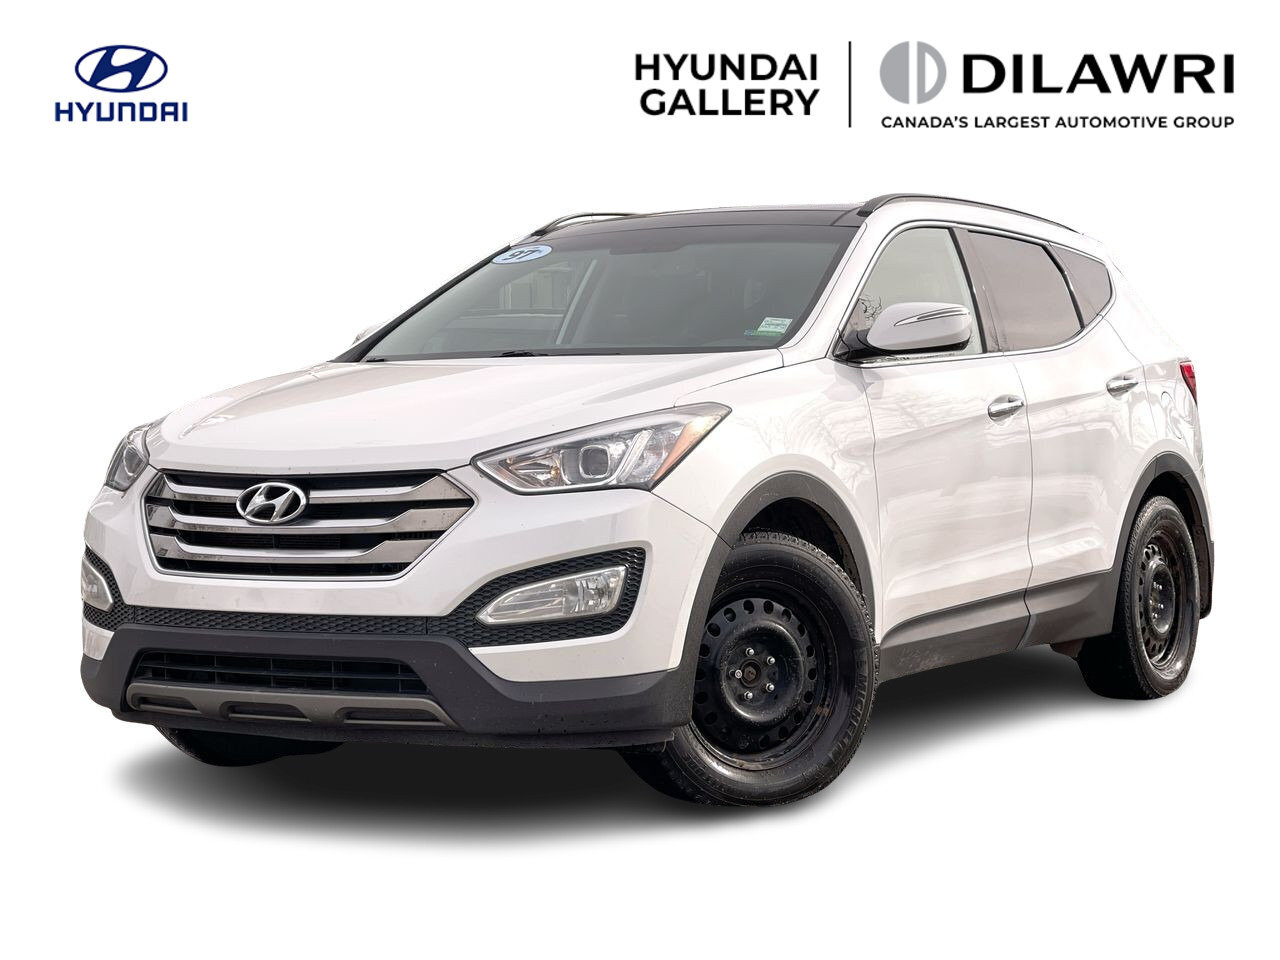 2015 Hyundai Santa Fe Sport 2.0T AWD Limited 2 Sets of Rims/Tires | Leather | 